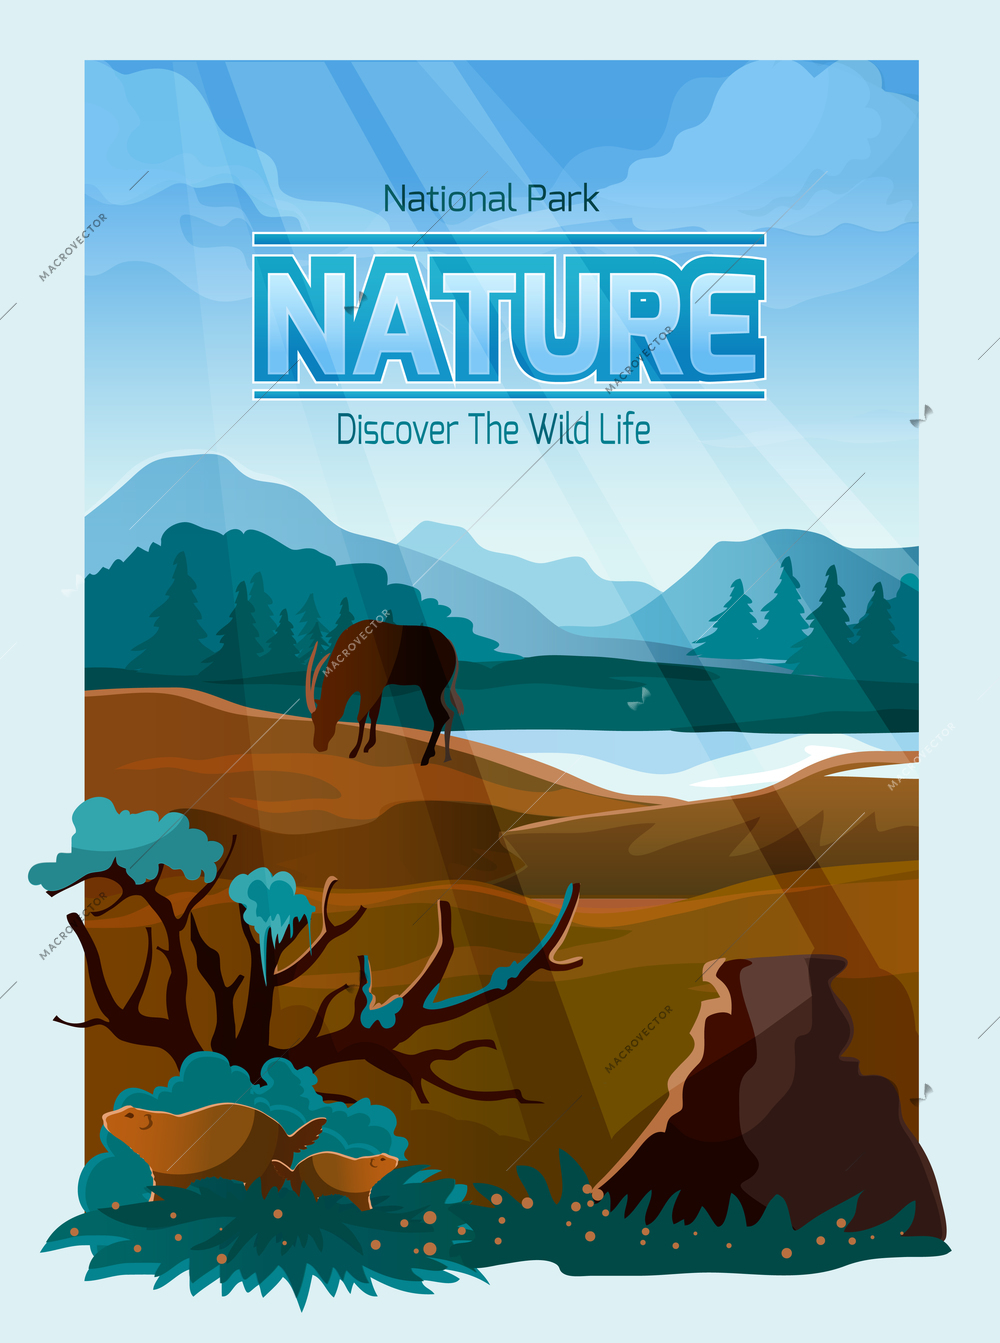 National park wild life decorative banner with mountains range background plants and animals abstract vector illustration